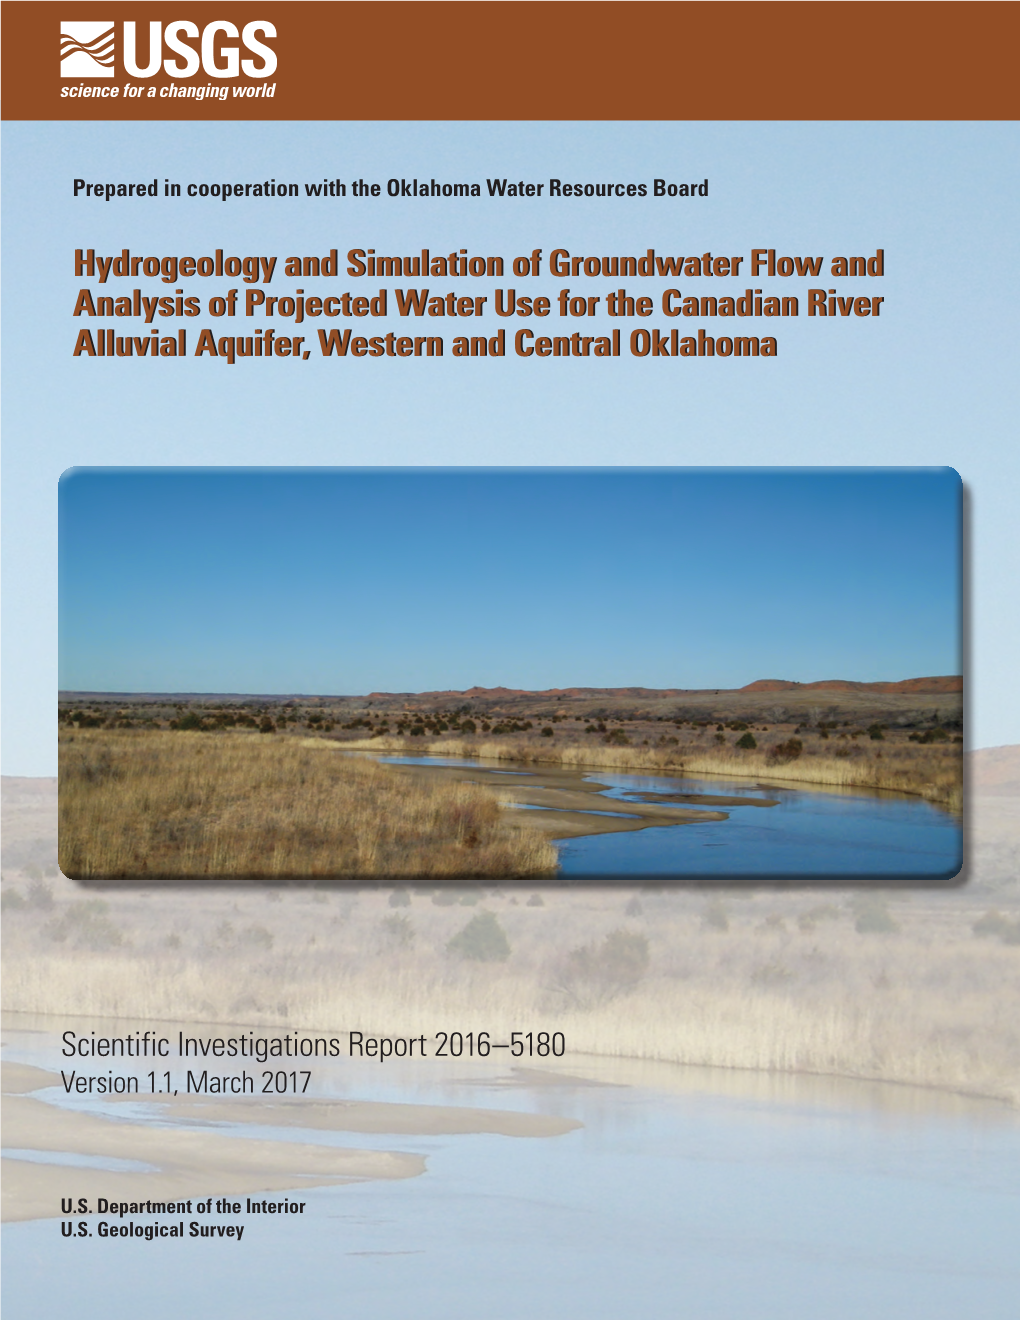 Hydrogeology and Simulation of Groundwater Flow and Analysis of Projected Water Use for the Canadian River Alluvial Aquifer, Western and Central Oklahoma